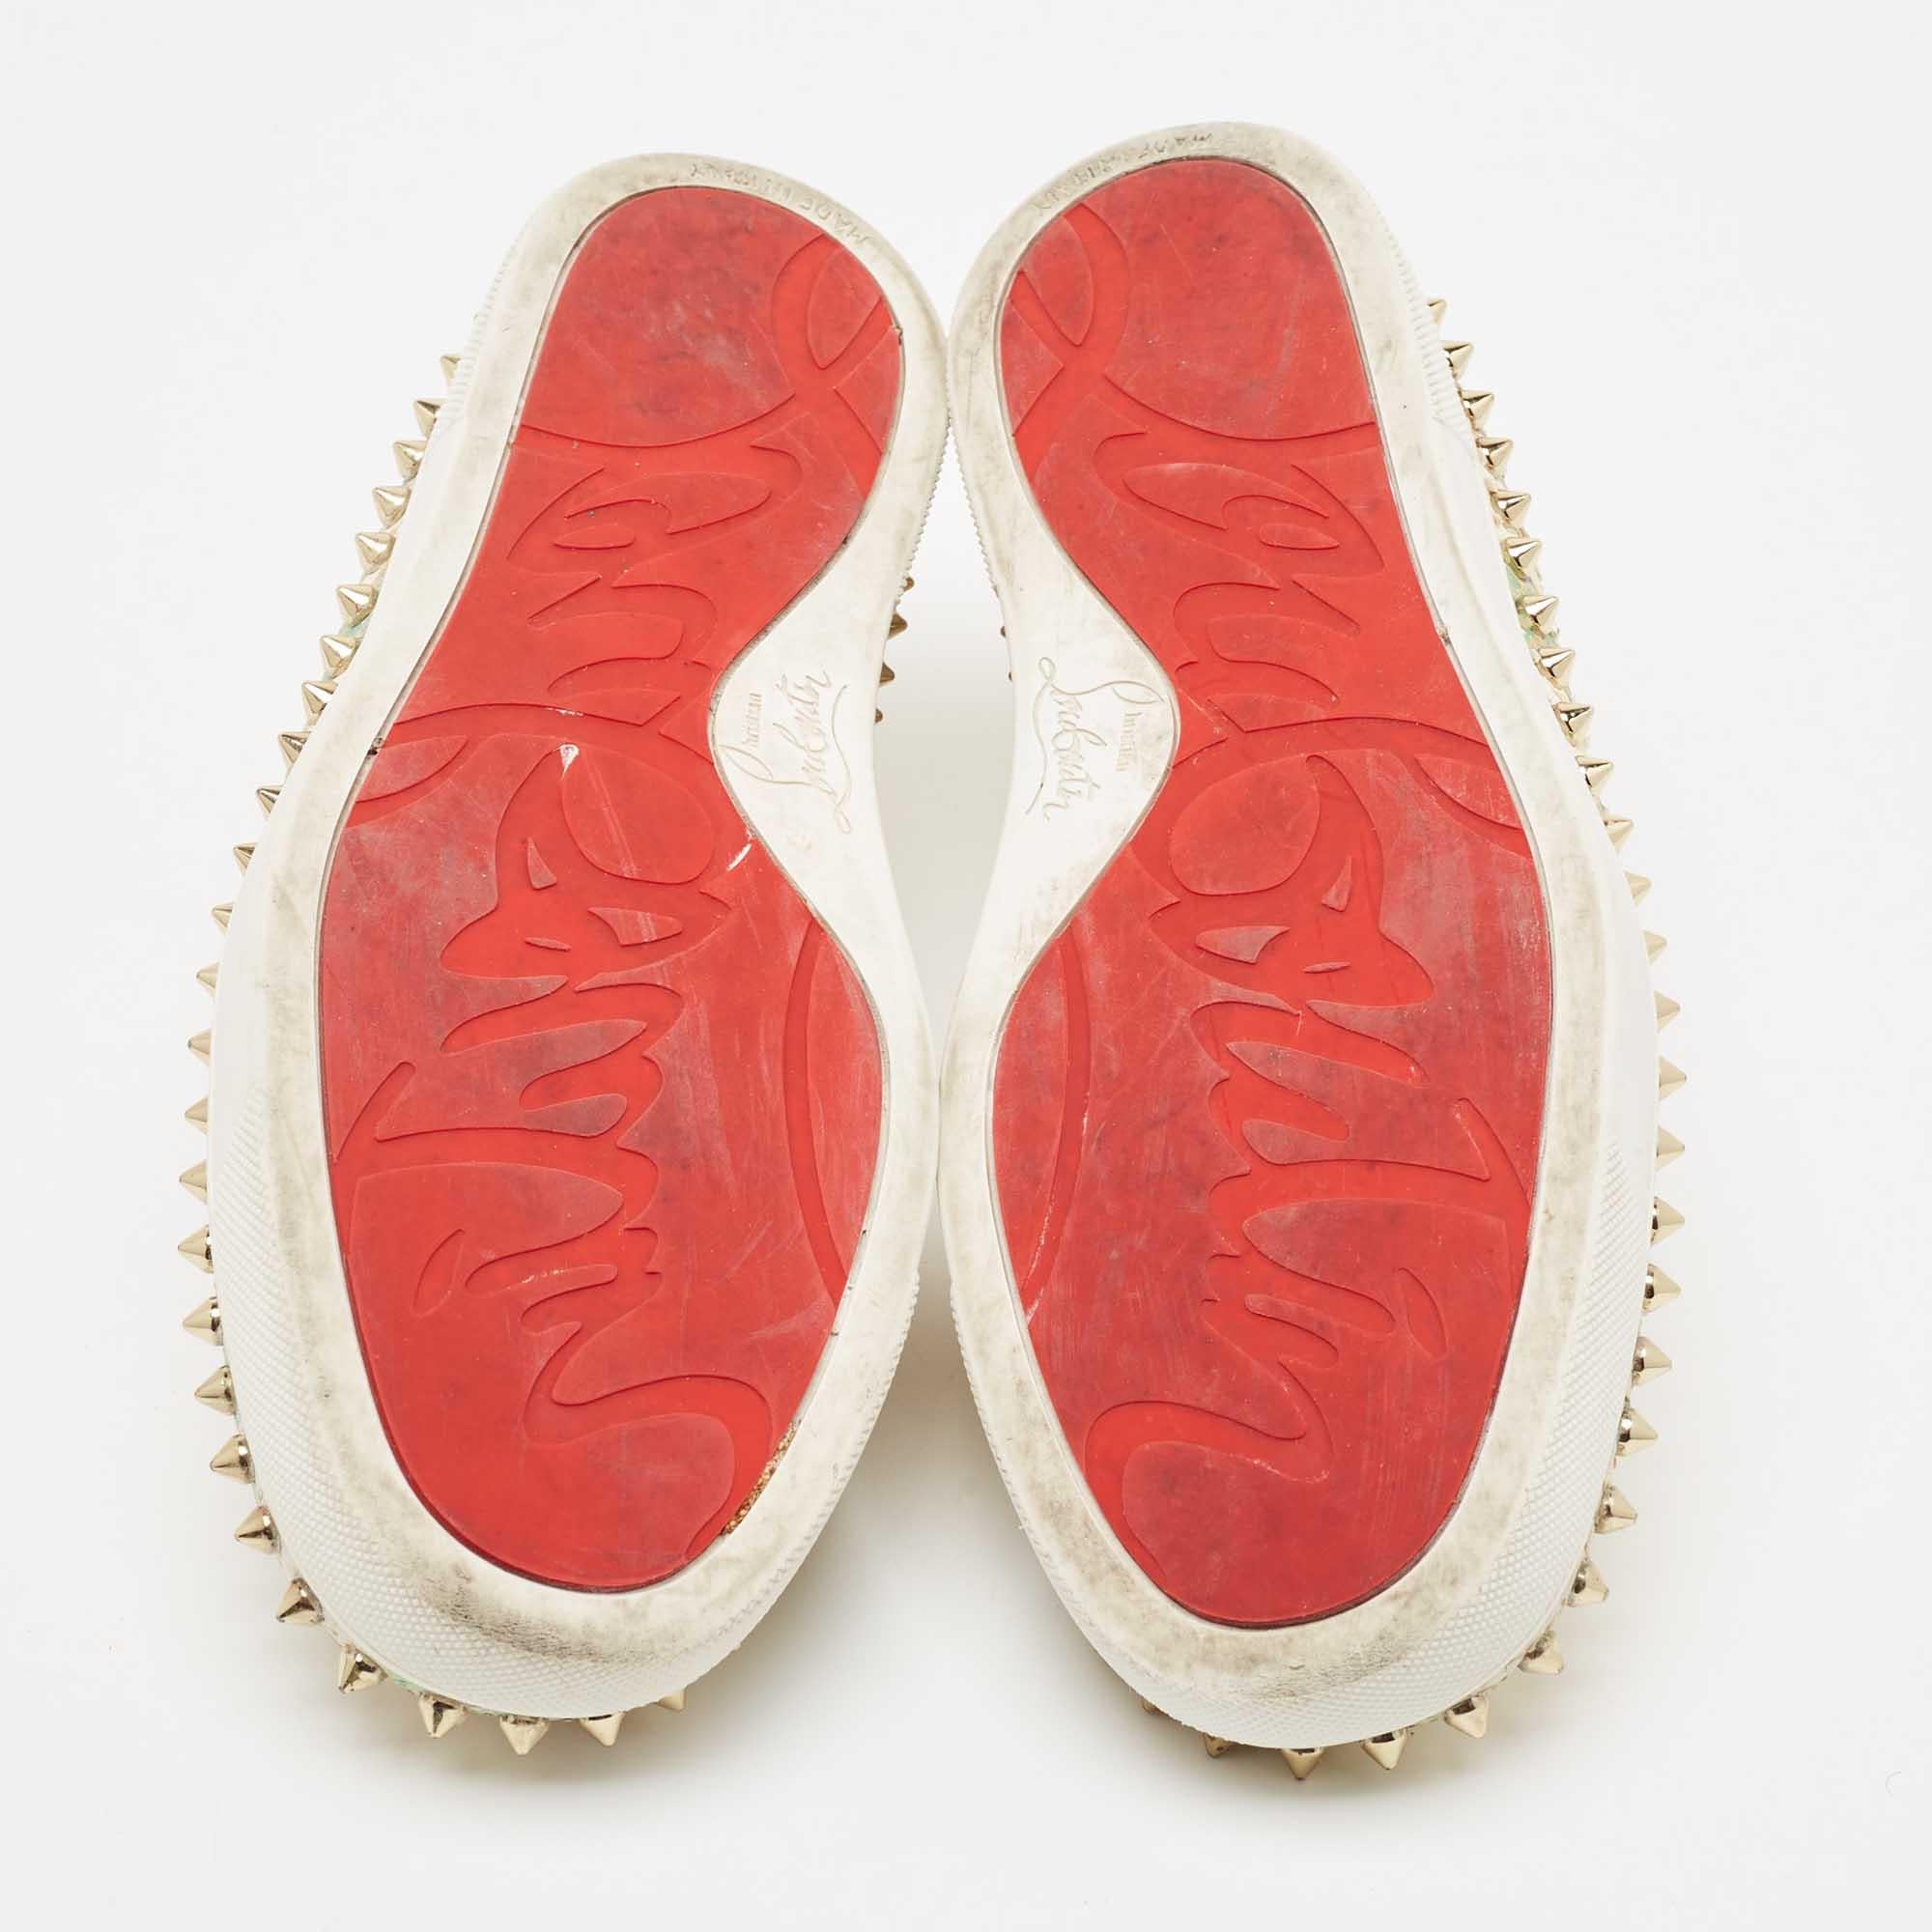 Christian Louboutin Floral Print Embossed Snakeskin Pik Boat Sneakers Size 38.5 For Sale 2